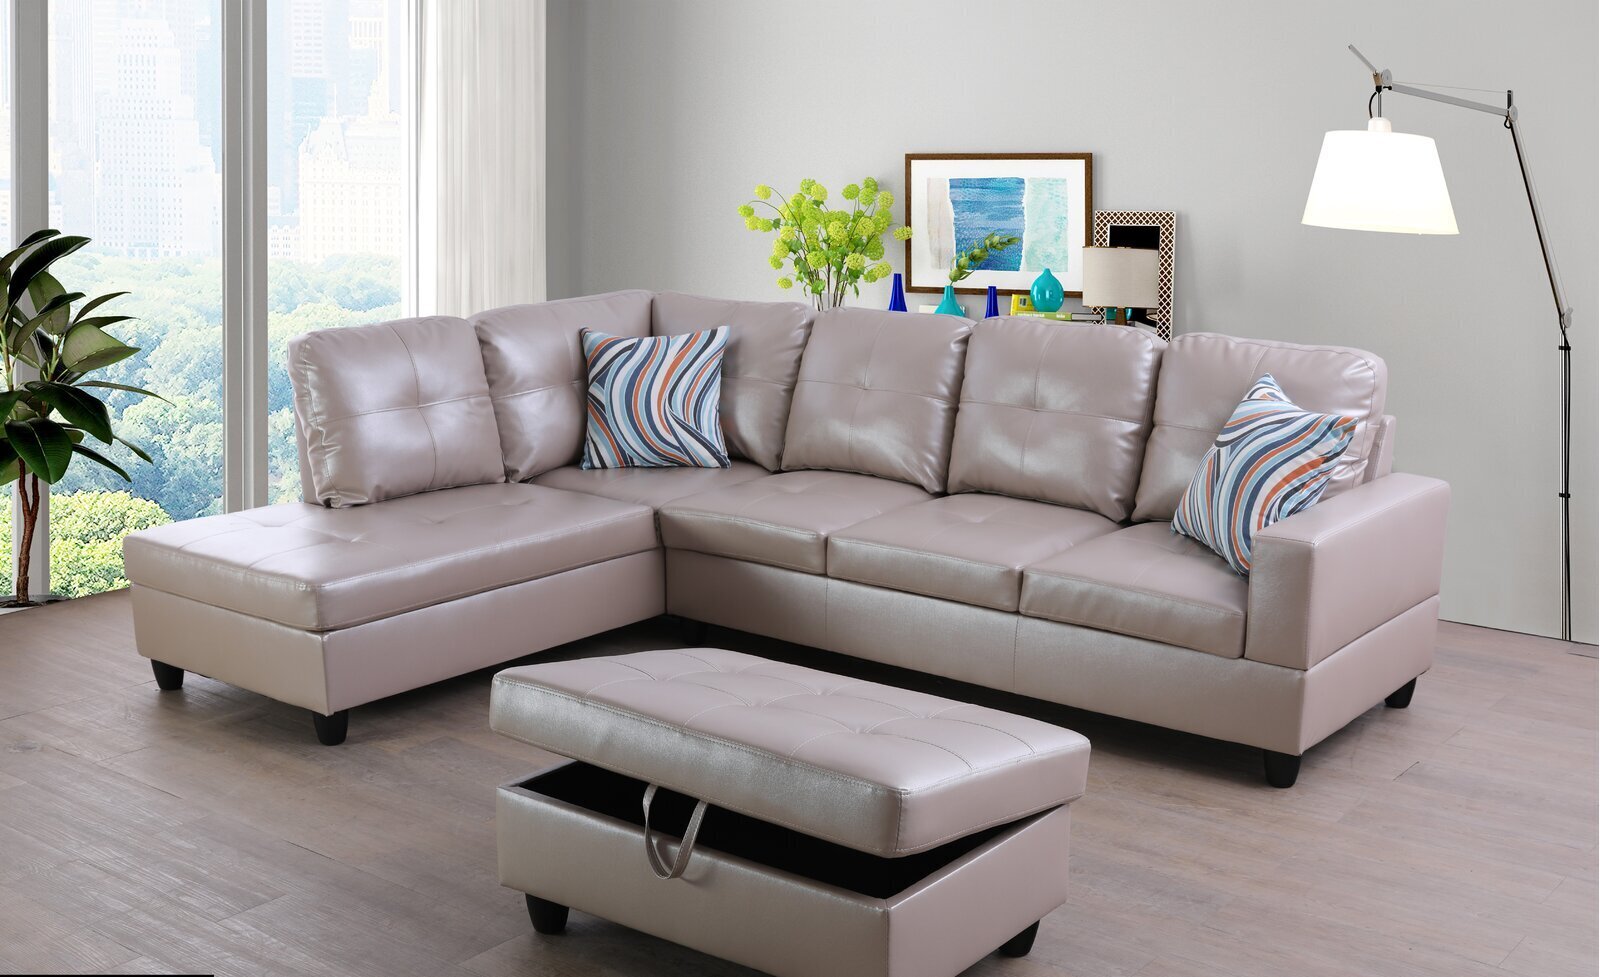 Faux Leather Sofa With Rectangular Ottoman